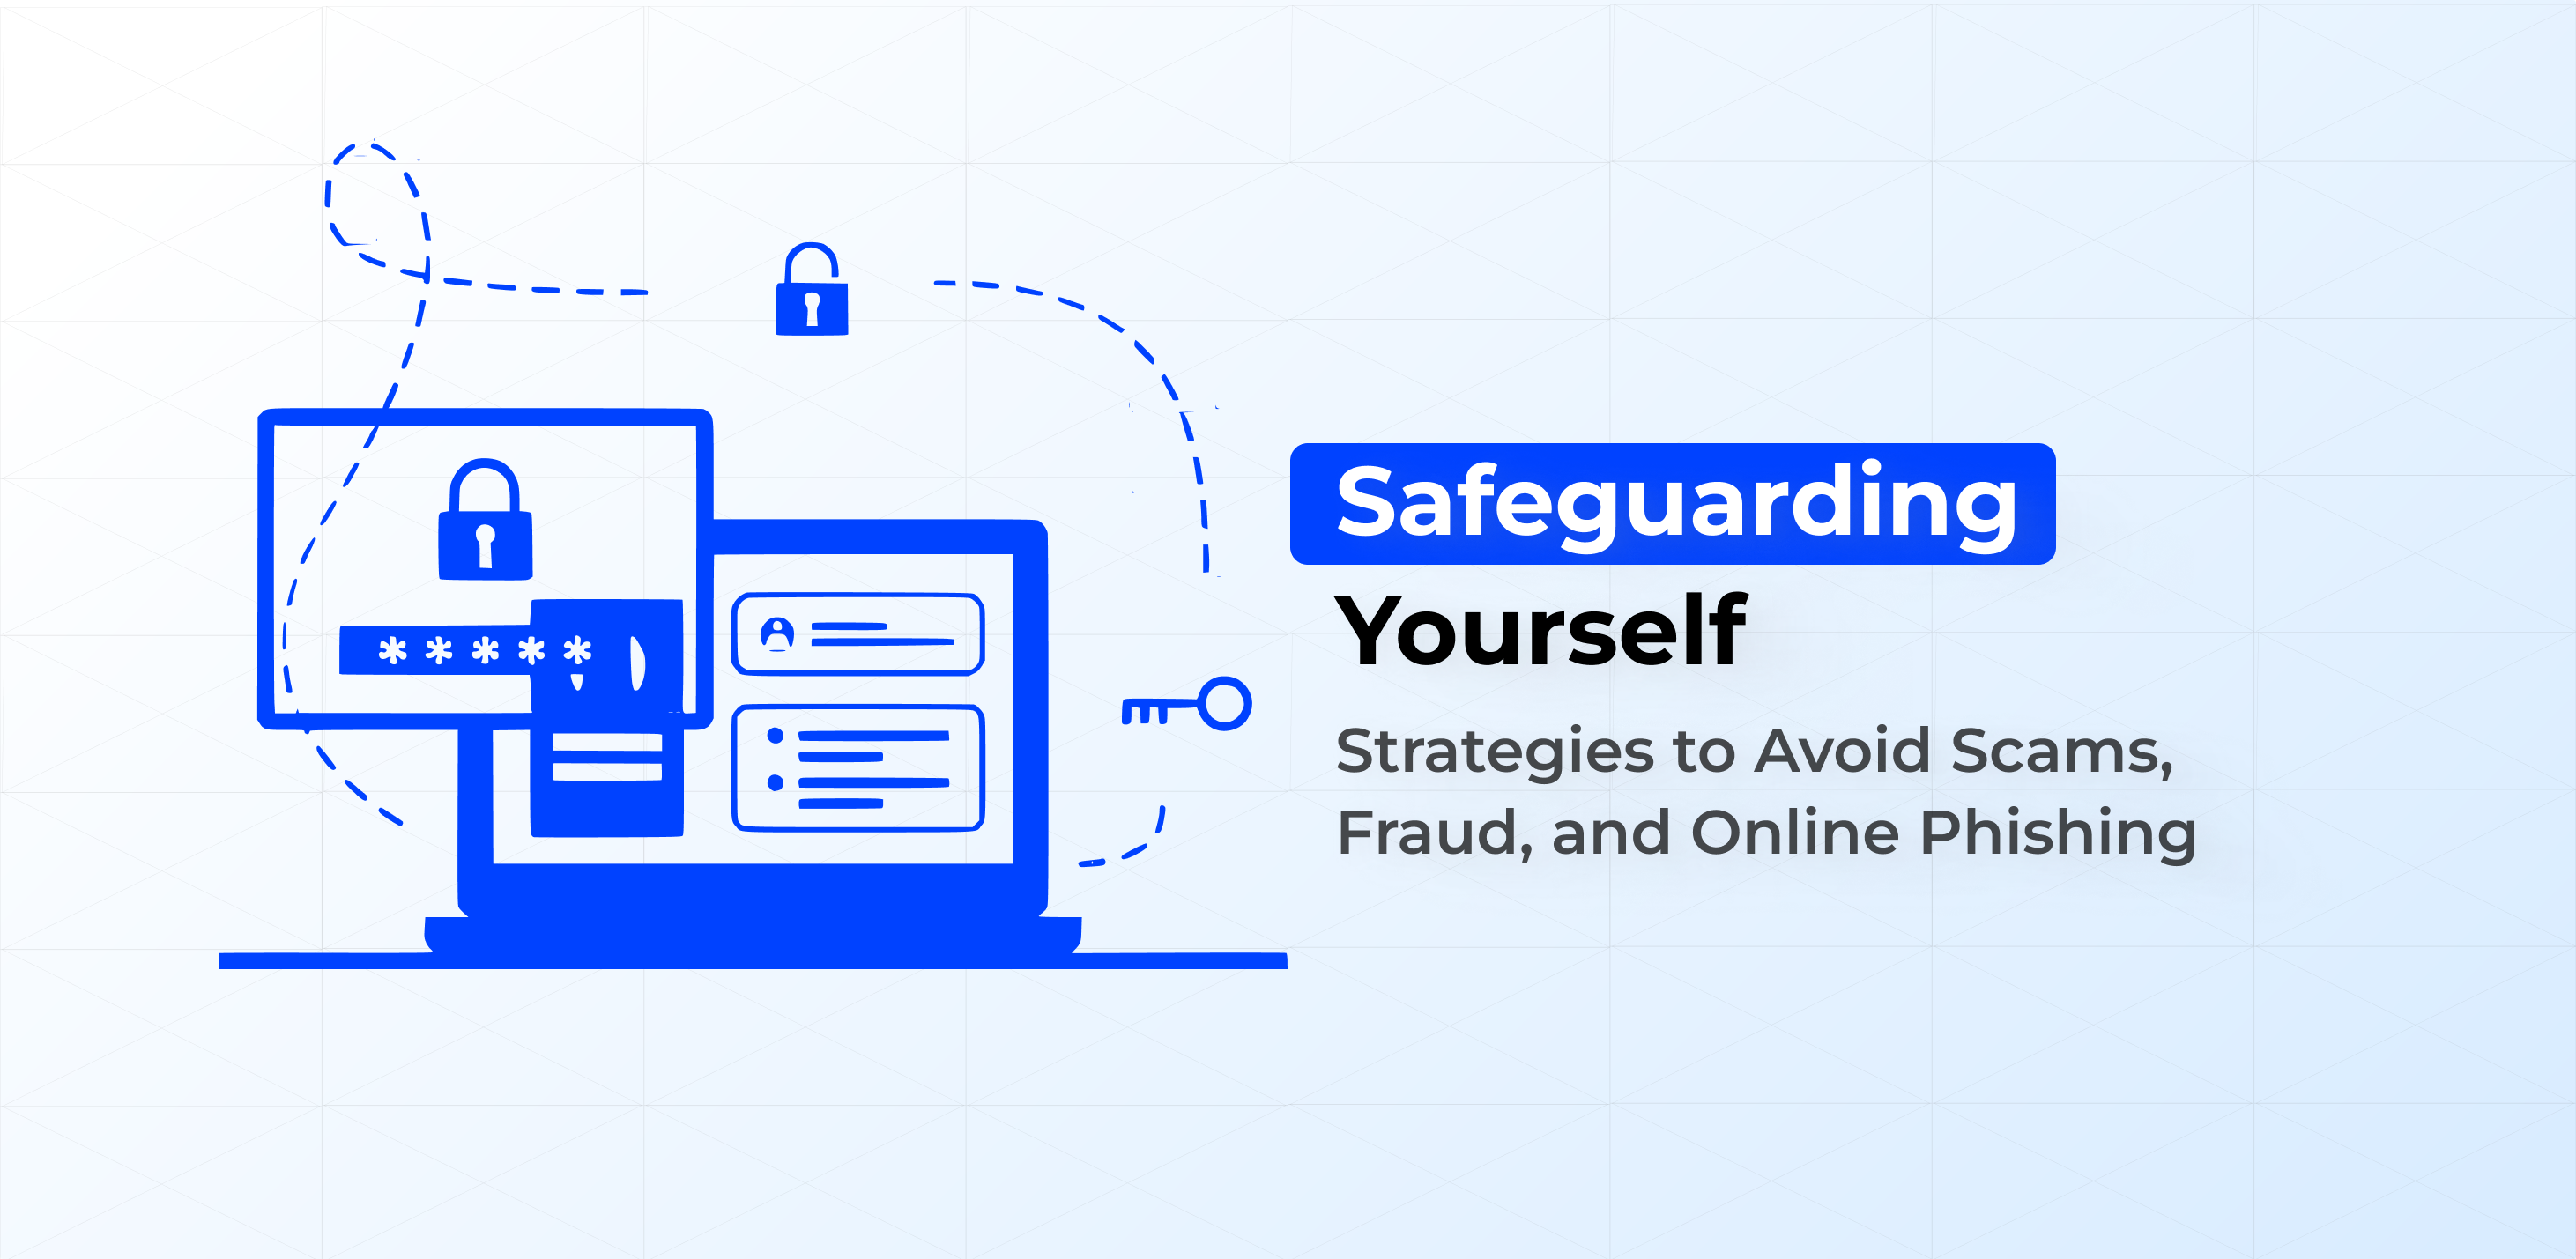 Safeguarding Yourself: Strategies to Avoid Scams, Fraud, and Online Phishing 